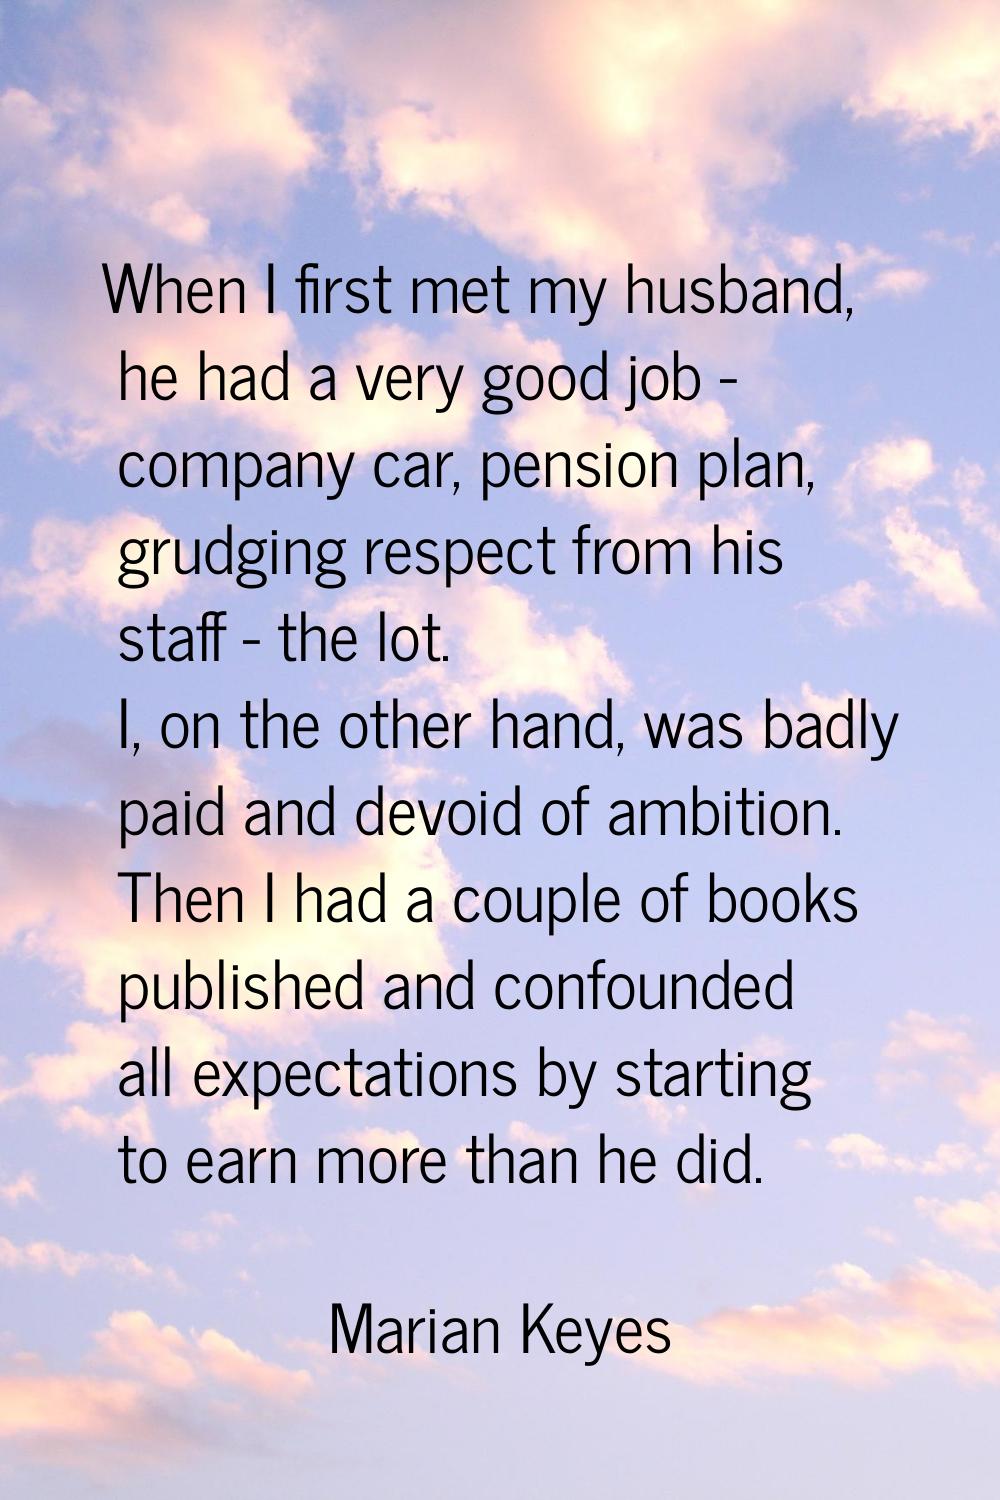 When I first met my husband, he had a very good job - company car, pension plan, grudging respect f